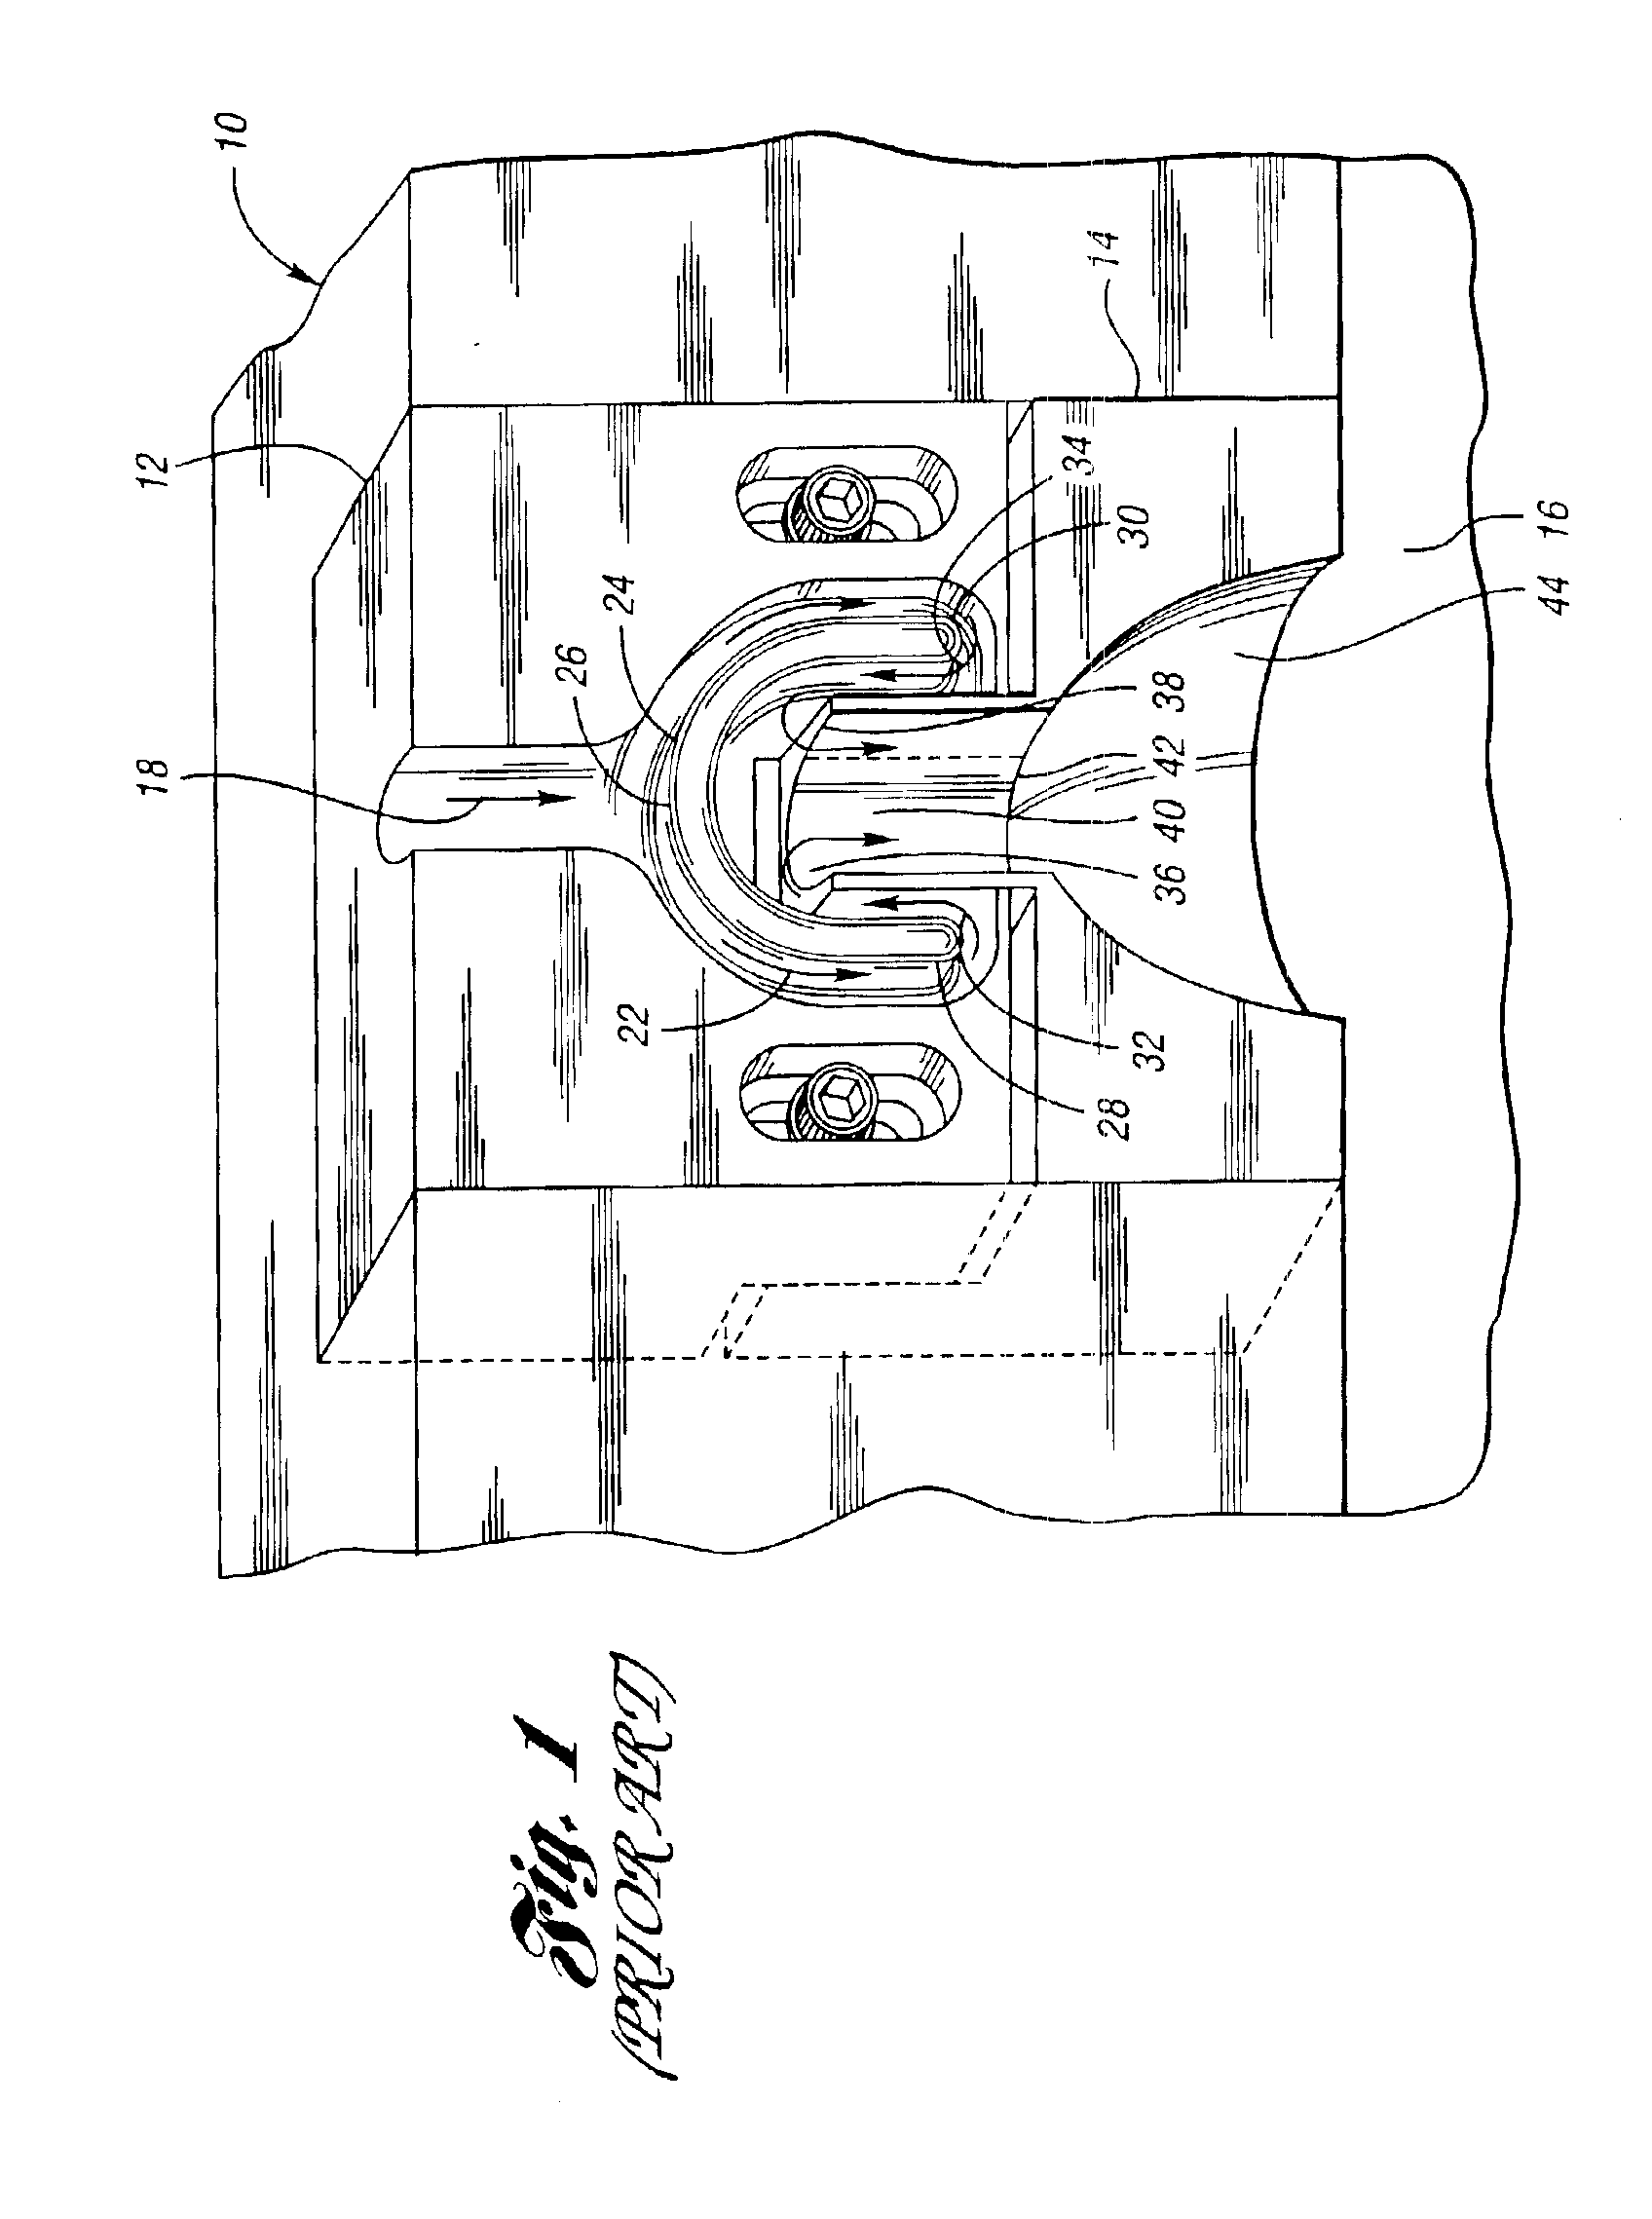 Method for making a reinforced, polymeric article in a reaction injection molding system and mold for use therein